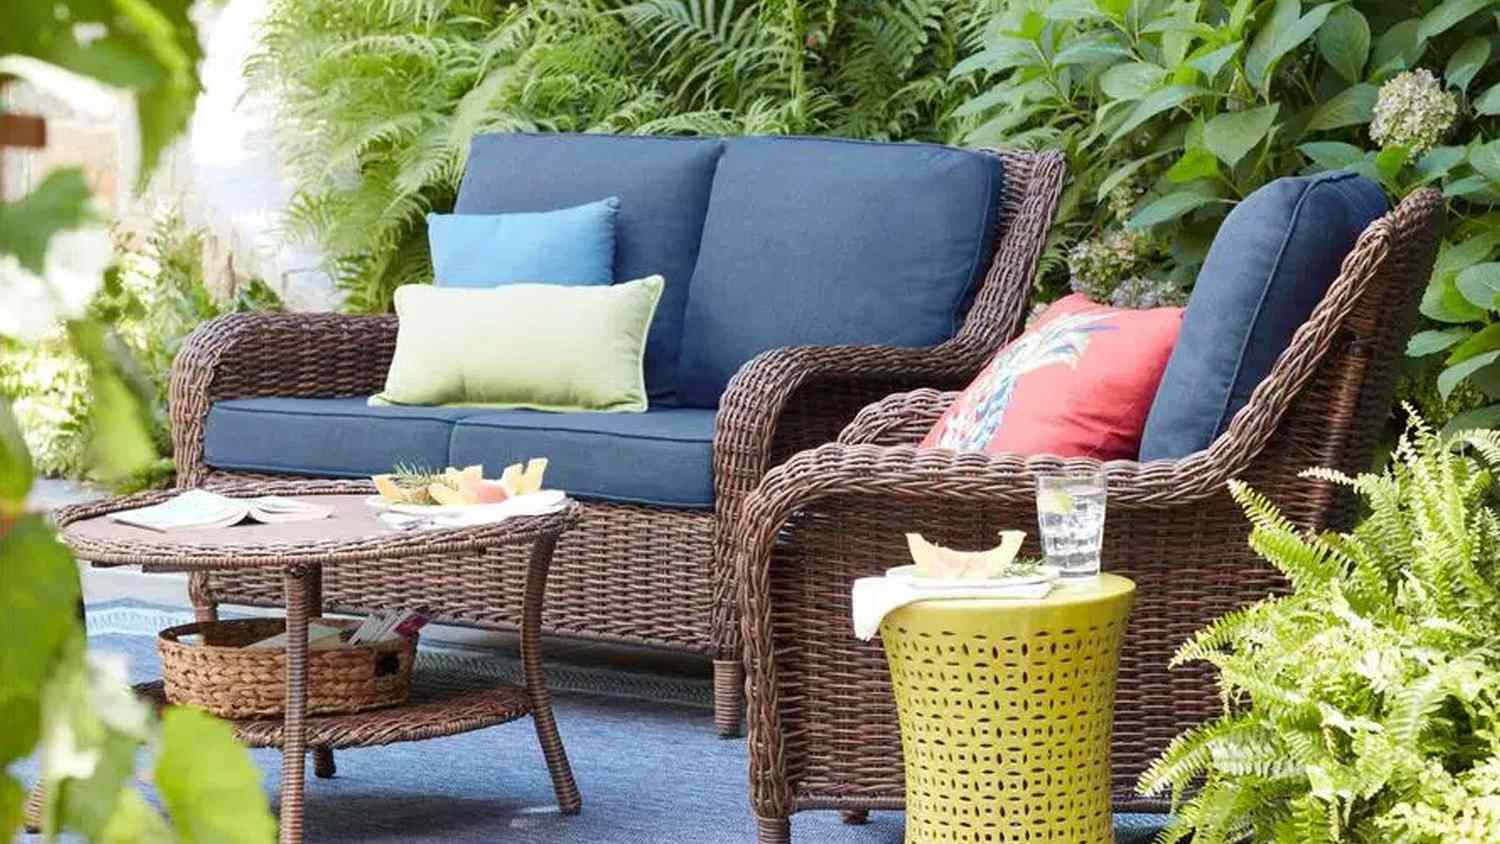 Outdoor Furniture, Small Outdoor Bistro Set With Umbrella